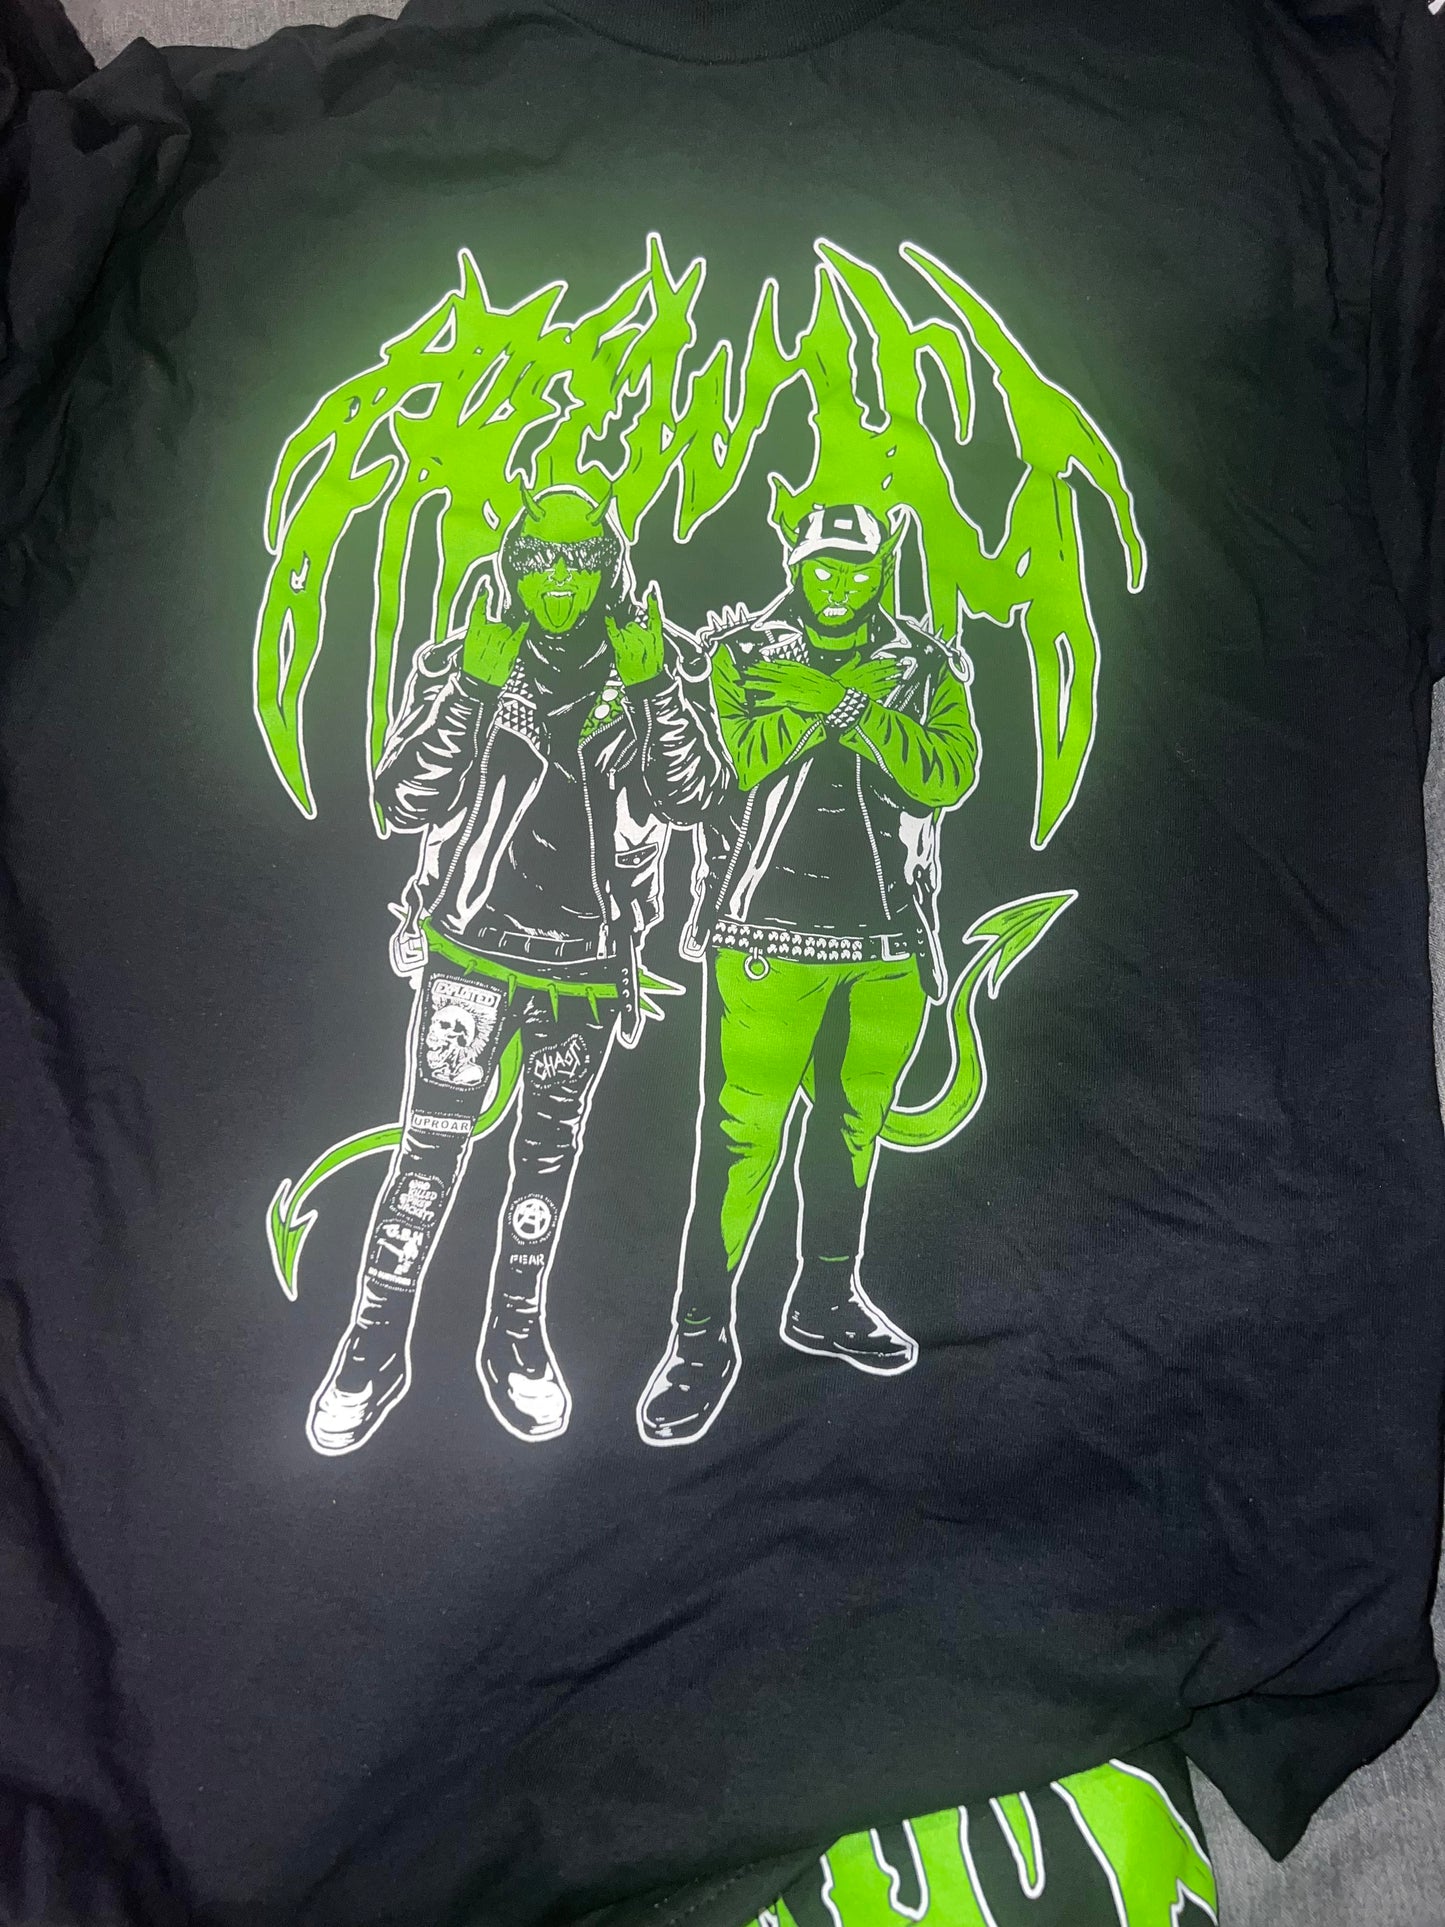 FREEWILL “DEAD ON ARRIVAL” (Green/Black) DOUBLE SIDED T-SHIRT